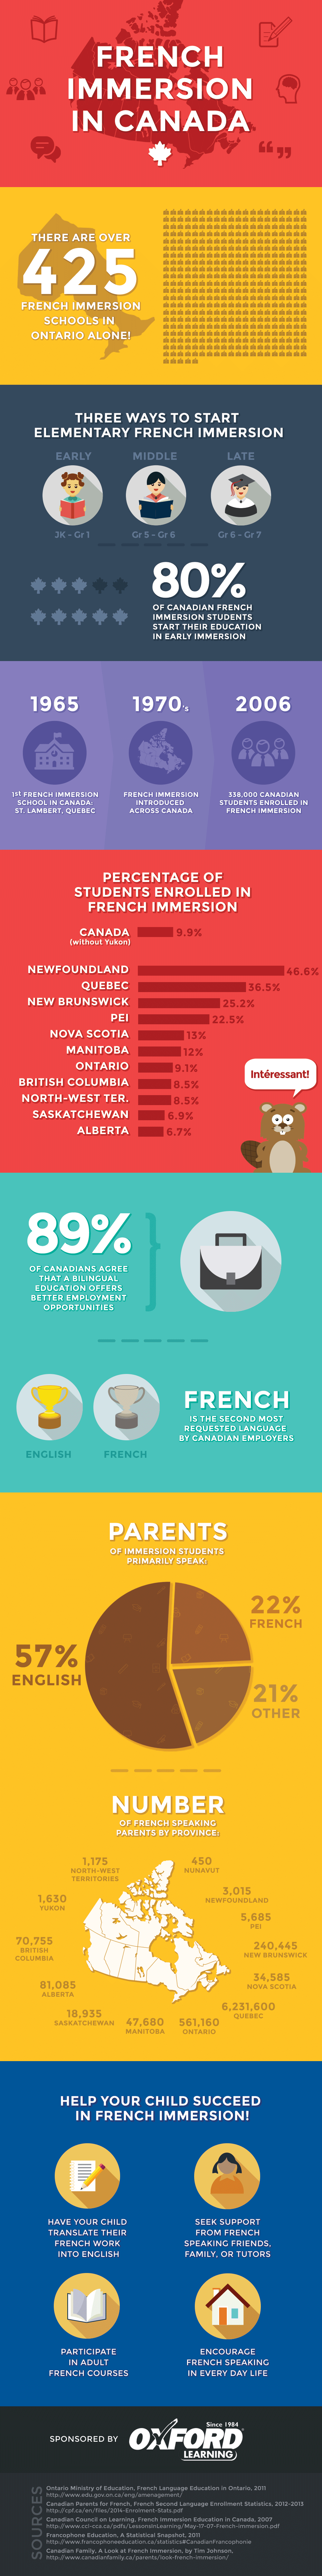 French Immersion in Canada